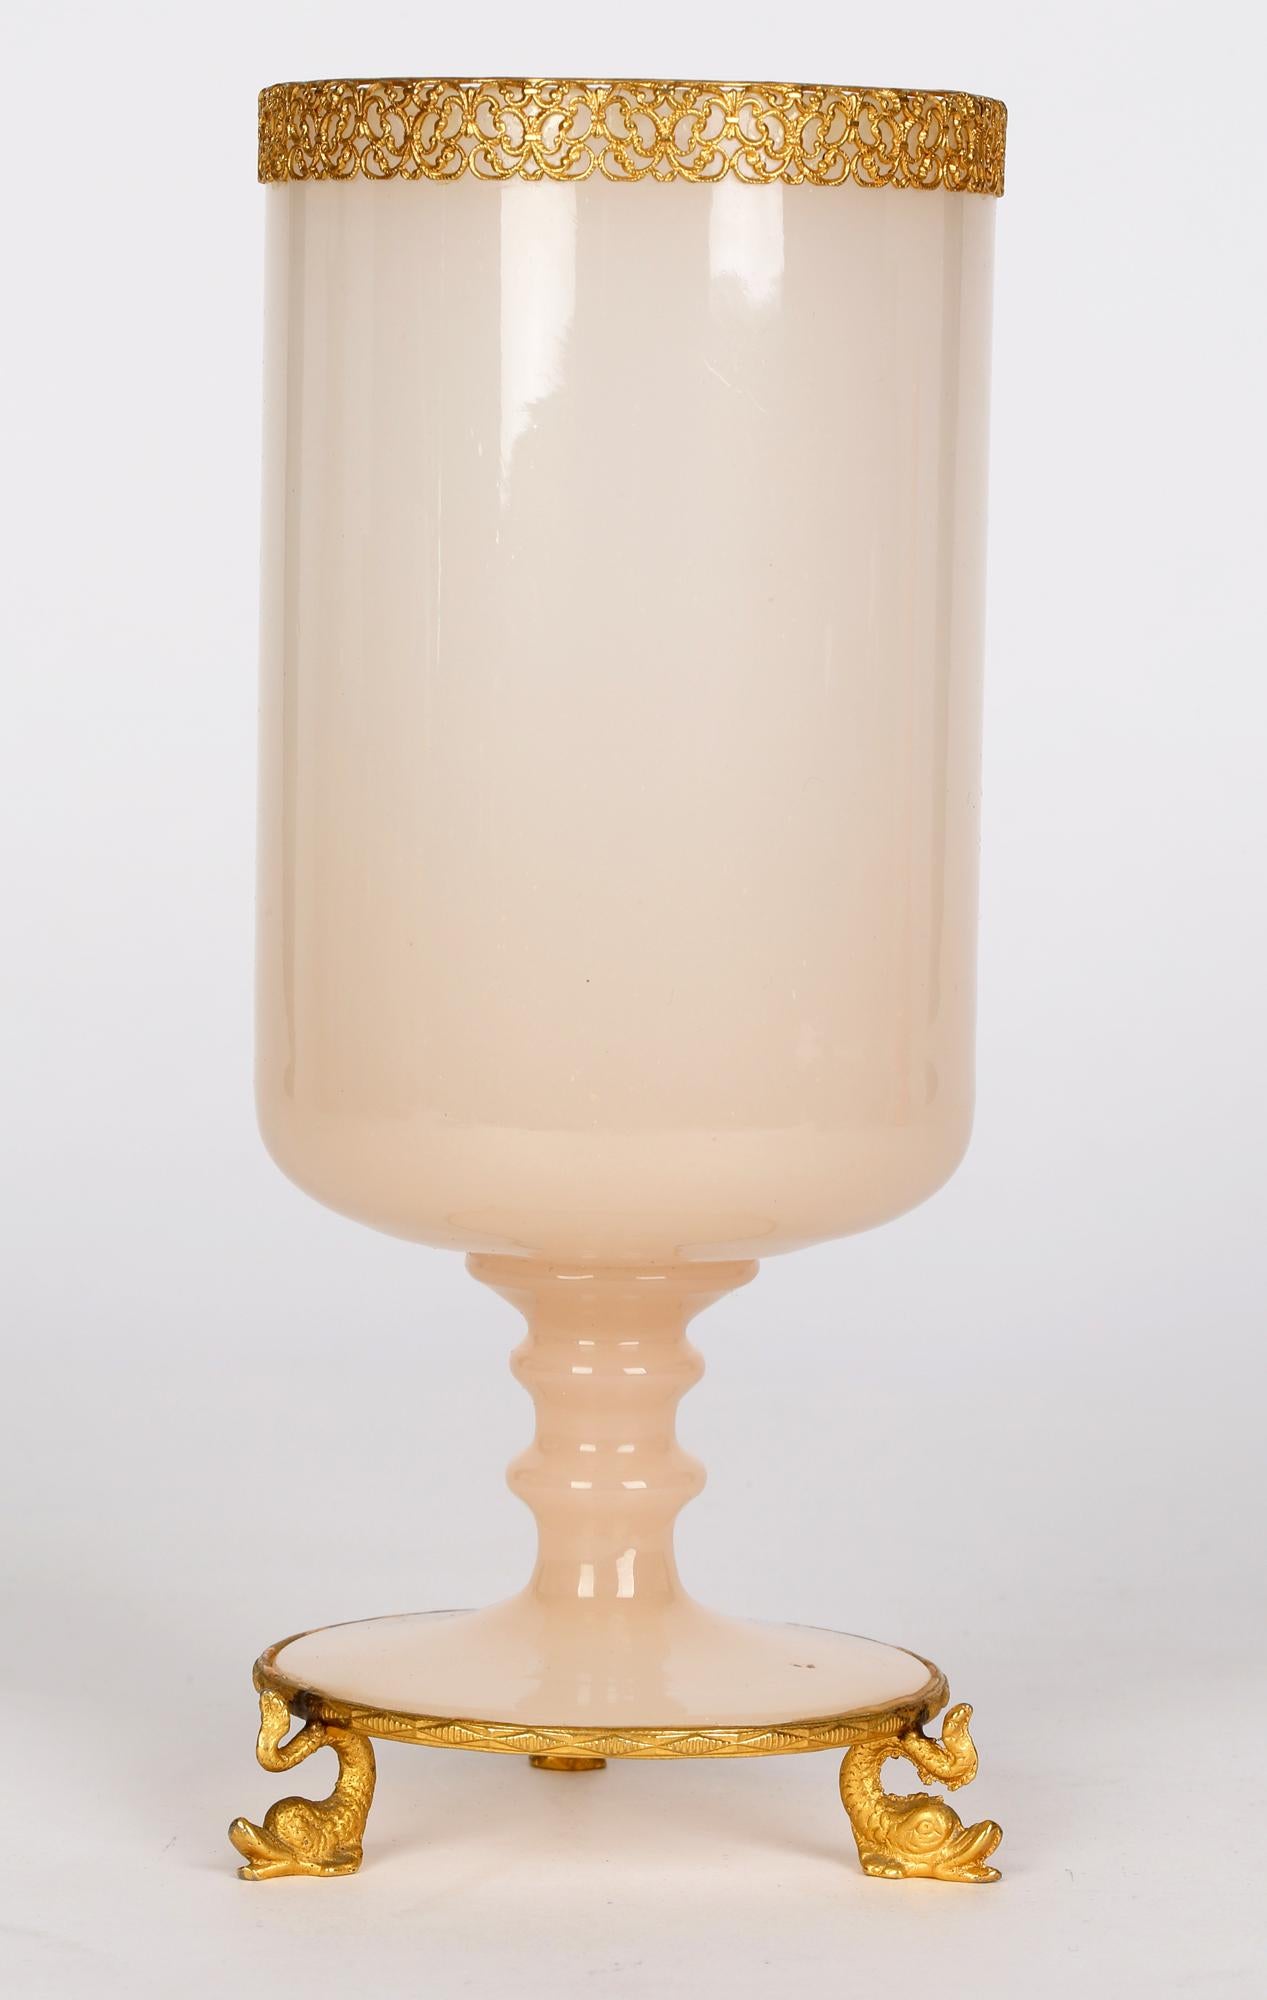 A very finely made antique French Palais Royal ormolu mounted pink opaline glass vase dating from around 1850. The pedestal vase is of cylindrical shape and possibly originates from Baccarat. It sits raised within an ormolu metal mount with three